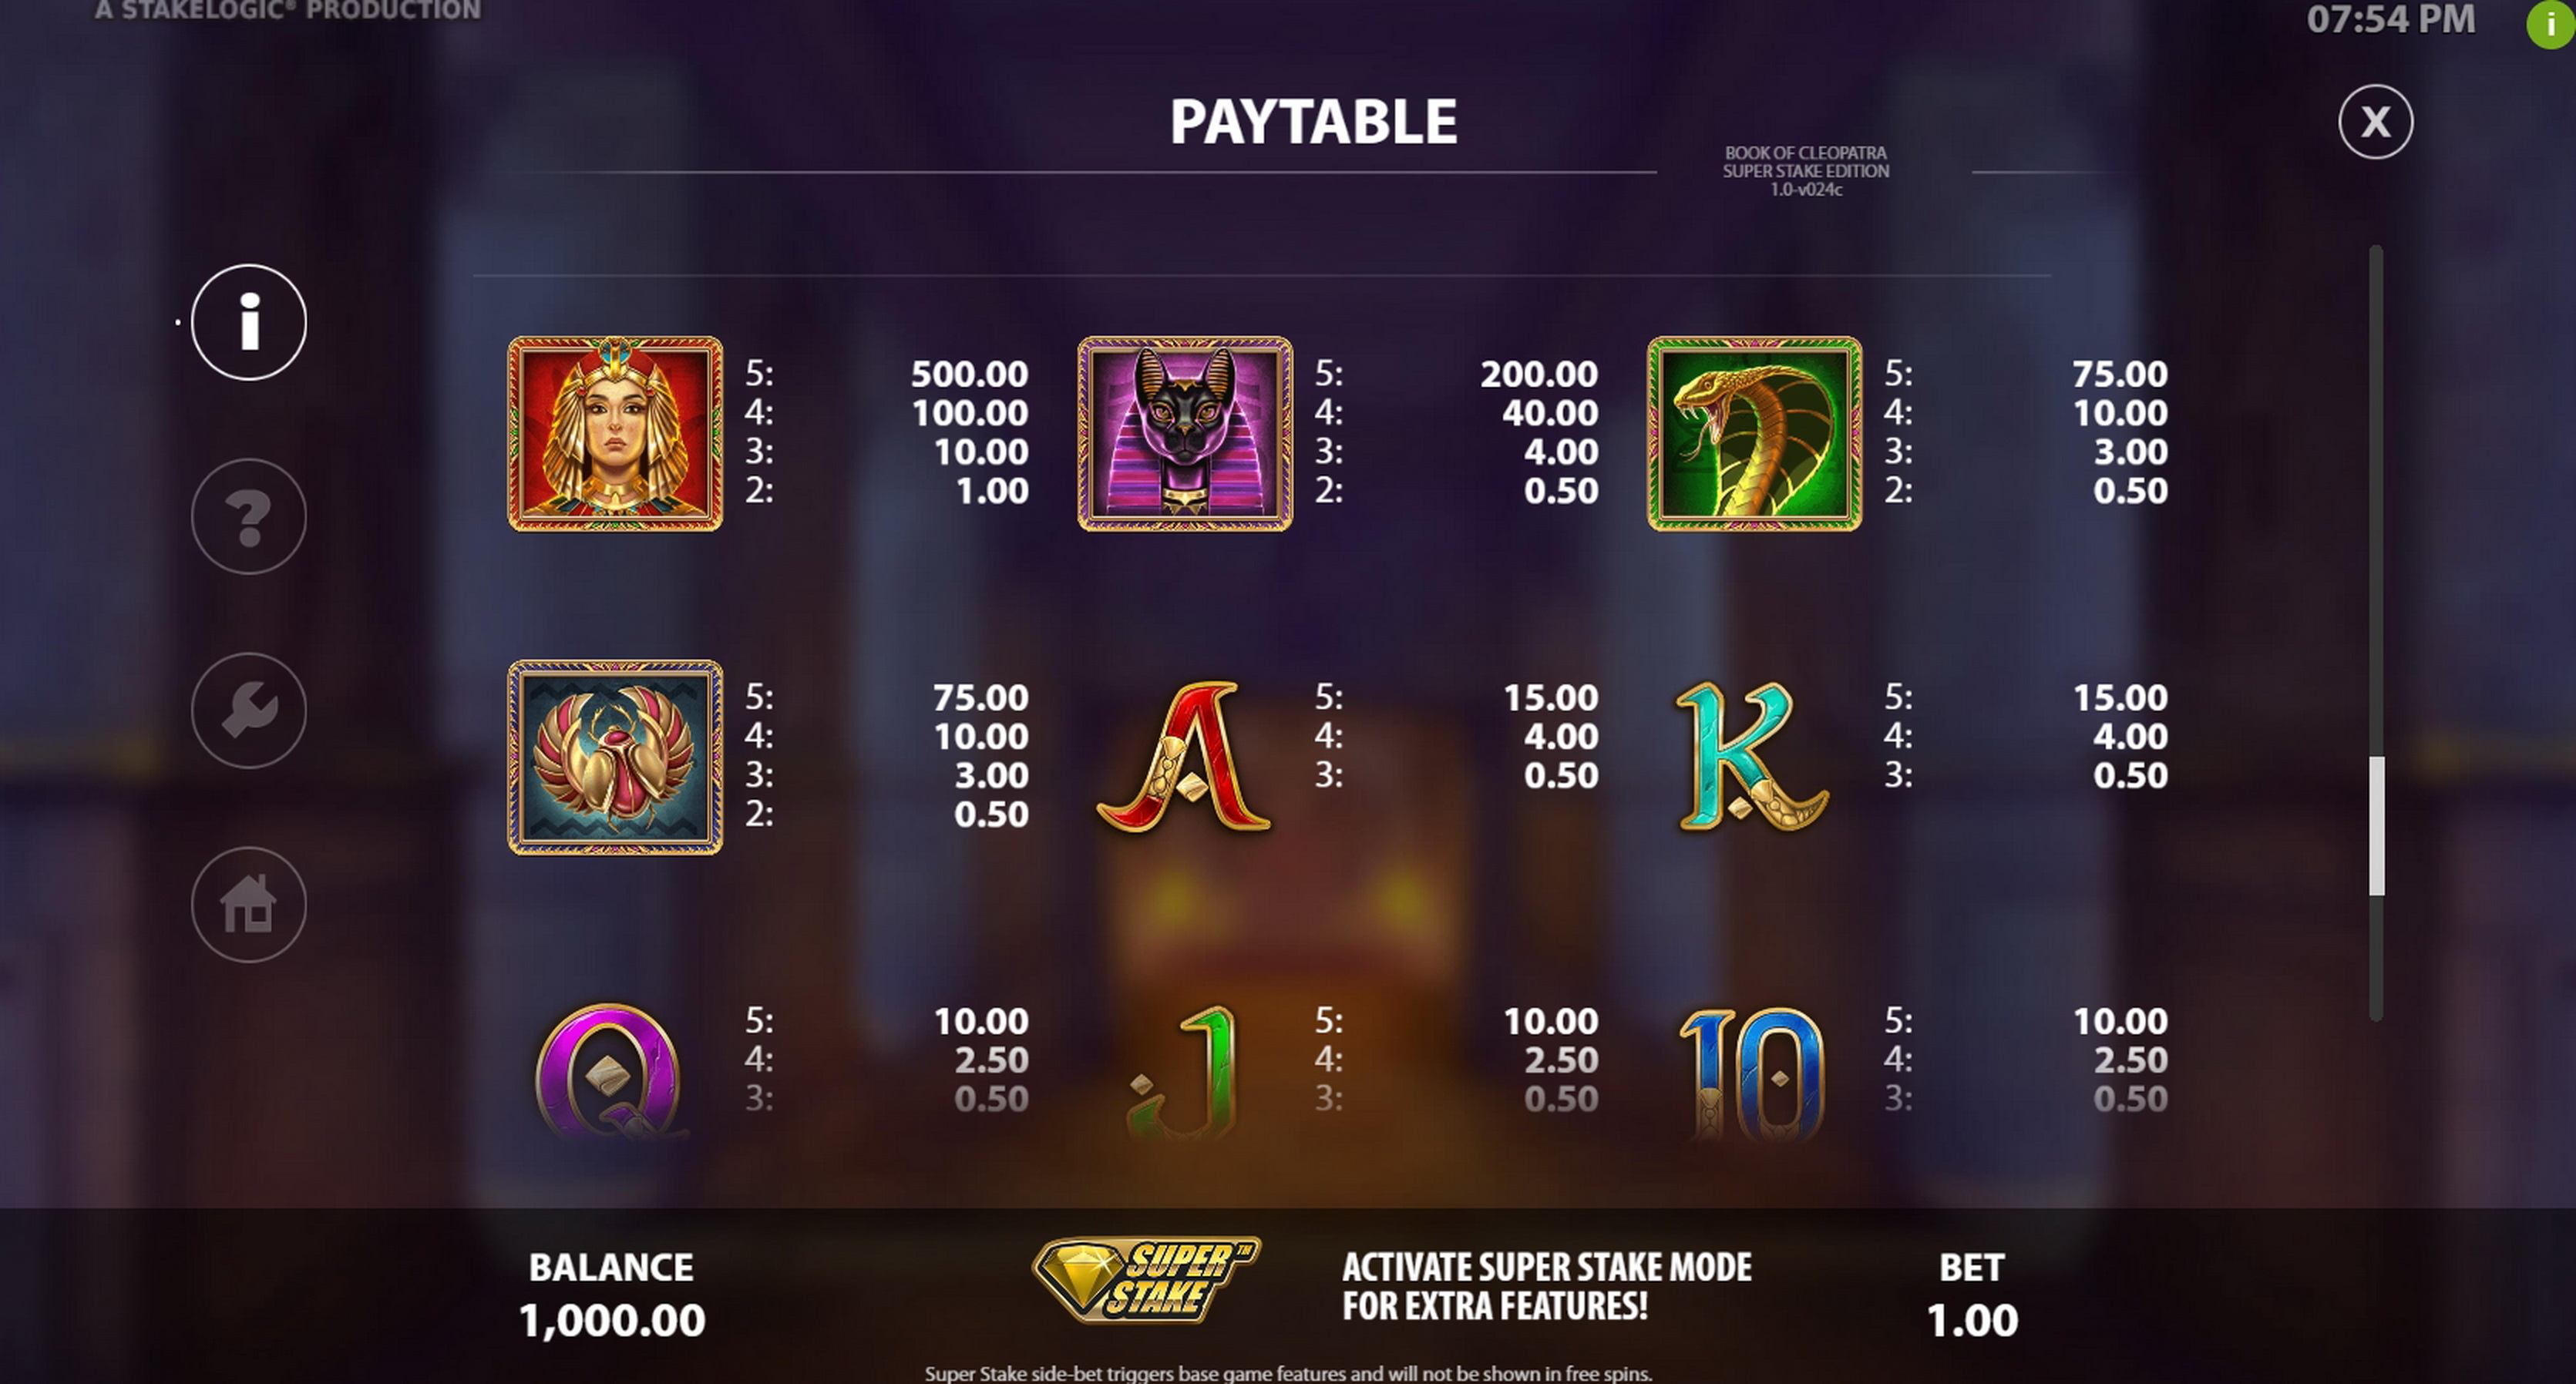 Info of Book of Cleopatra Super Stake Edition Slot Game by Stakelogic